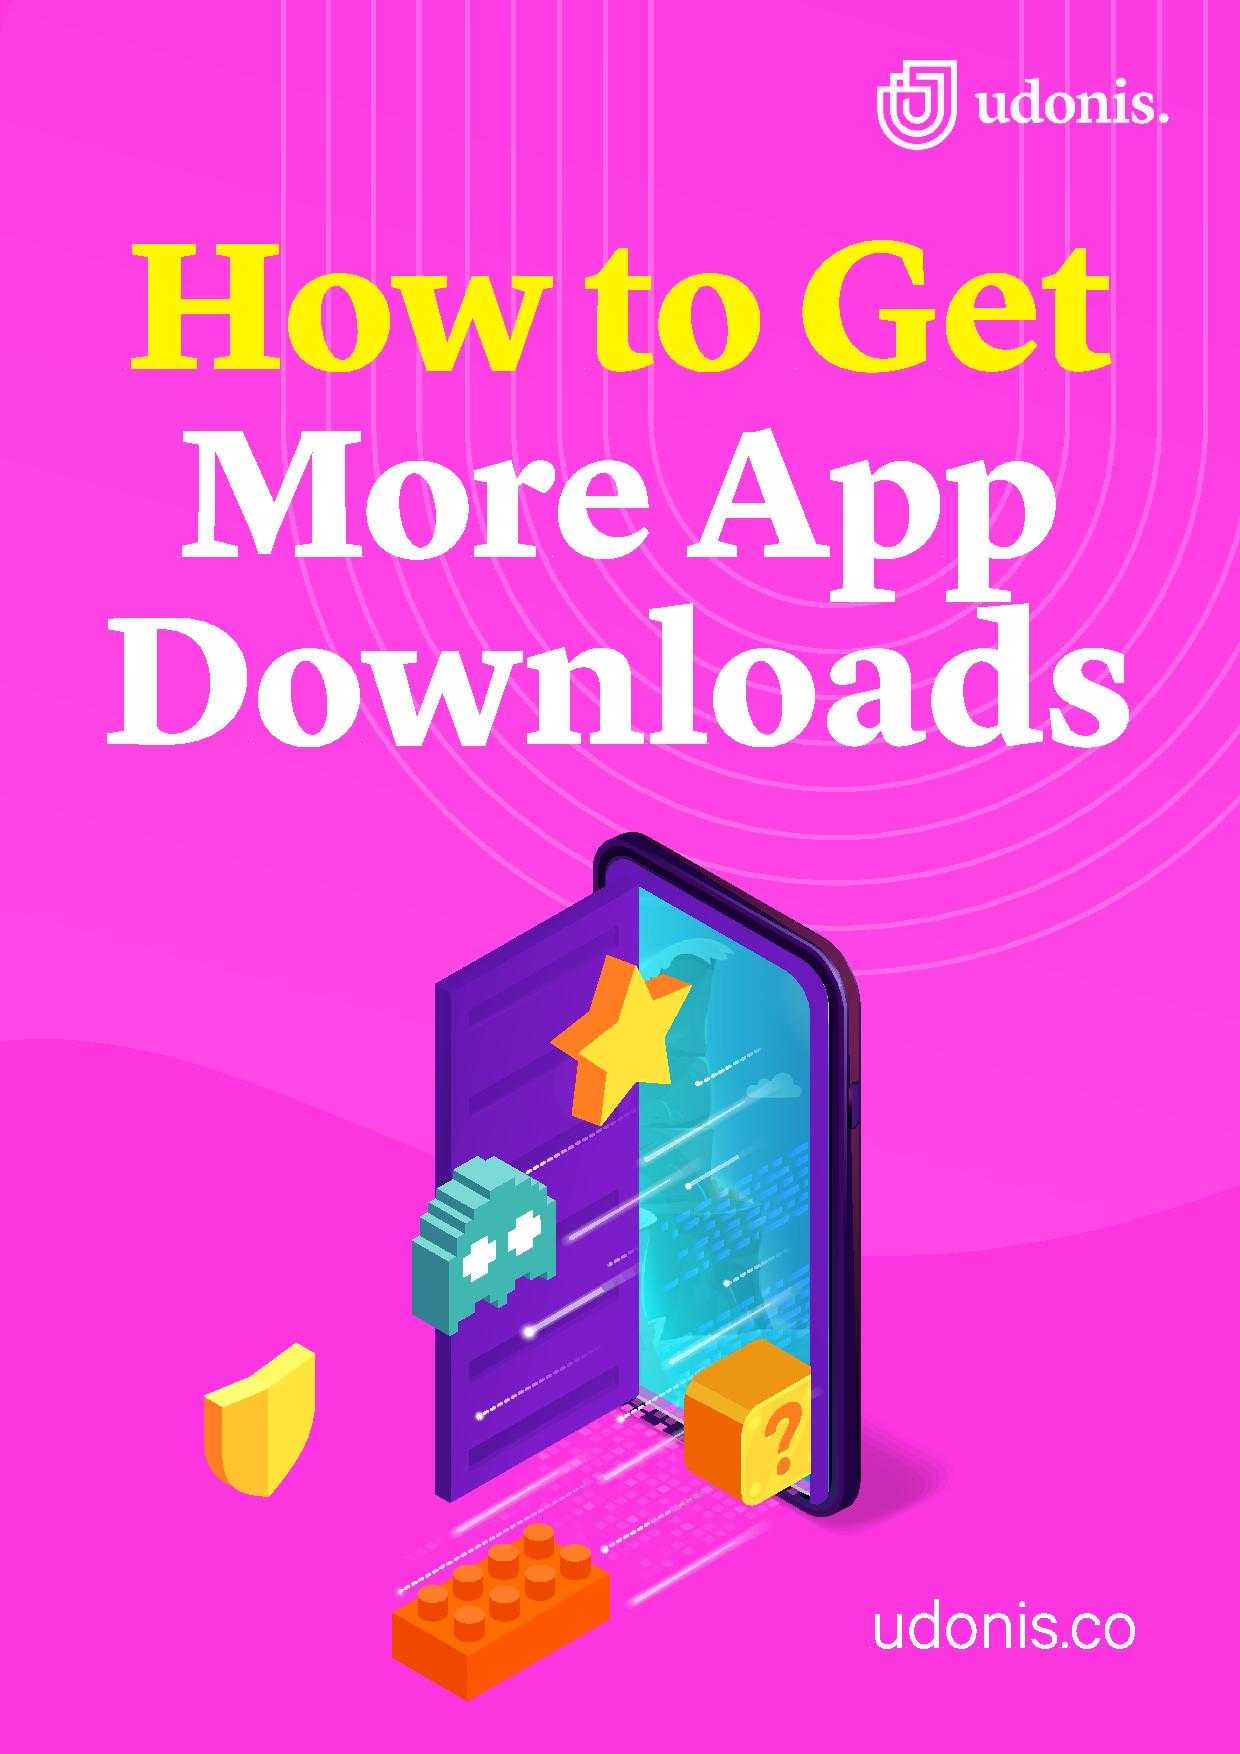 How to get more app downloads